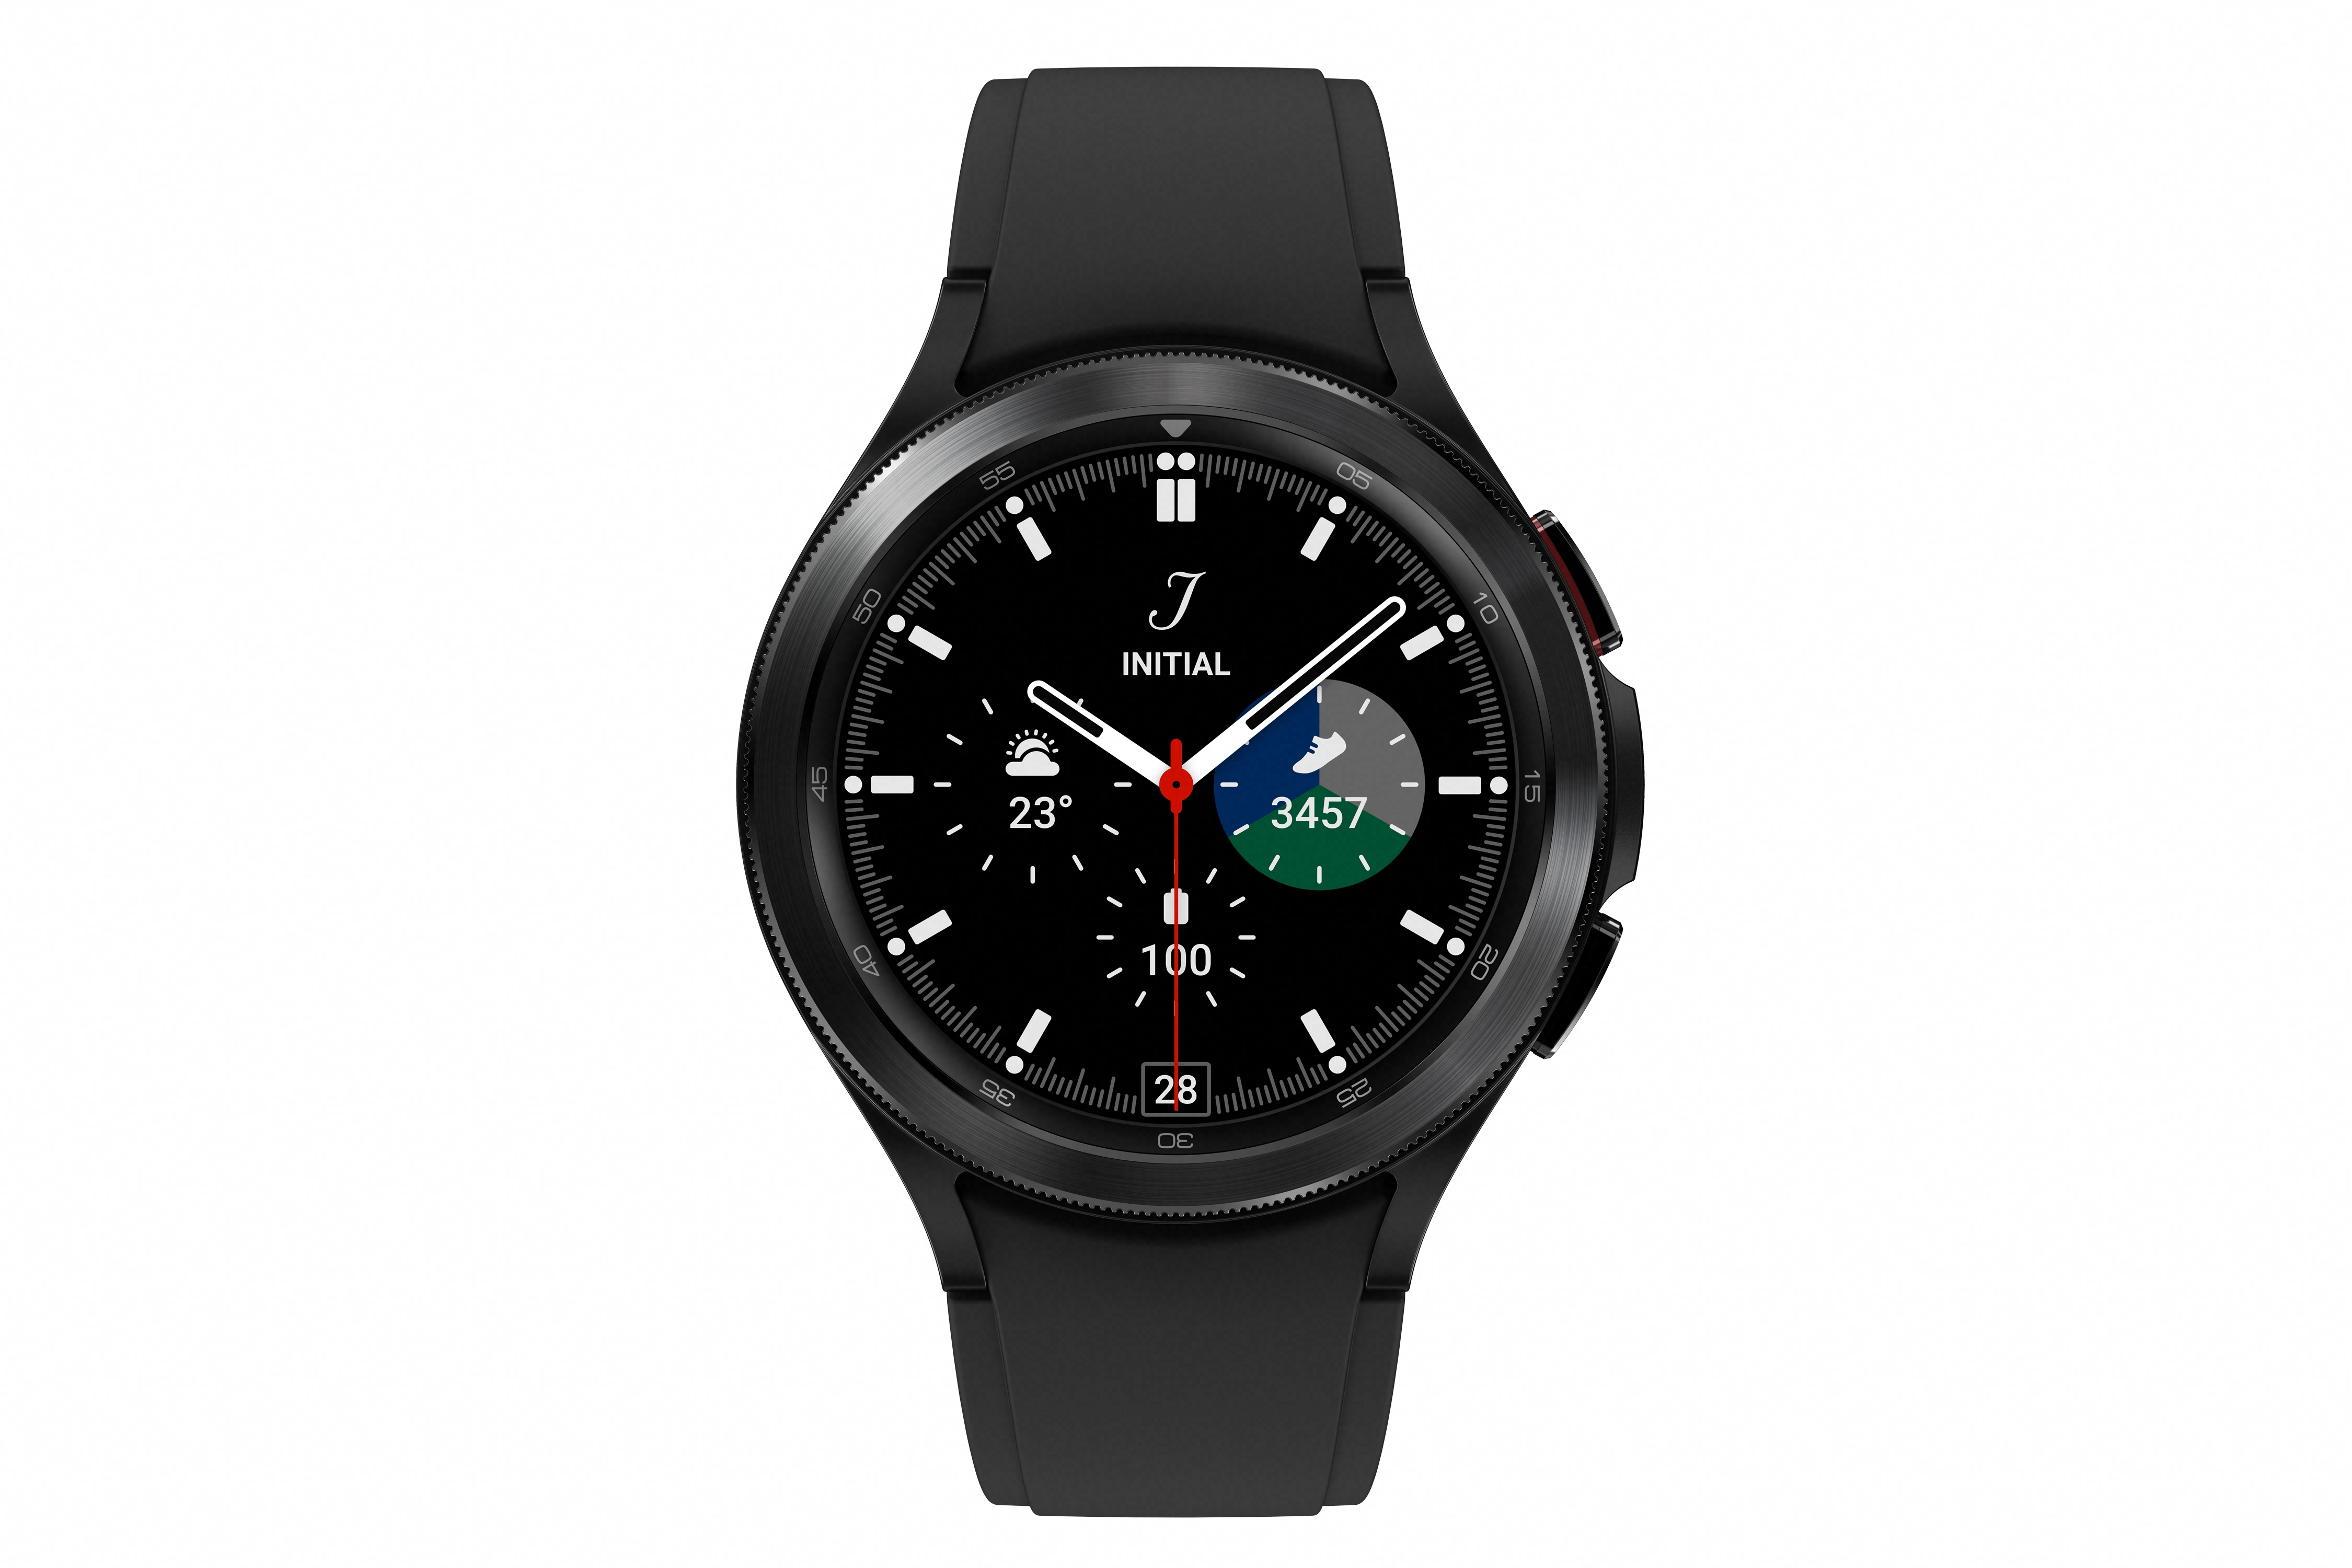 Galaxy Watch 4 Wear OS, 249, releases August 27 9to5Google